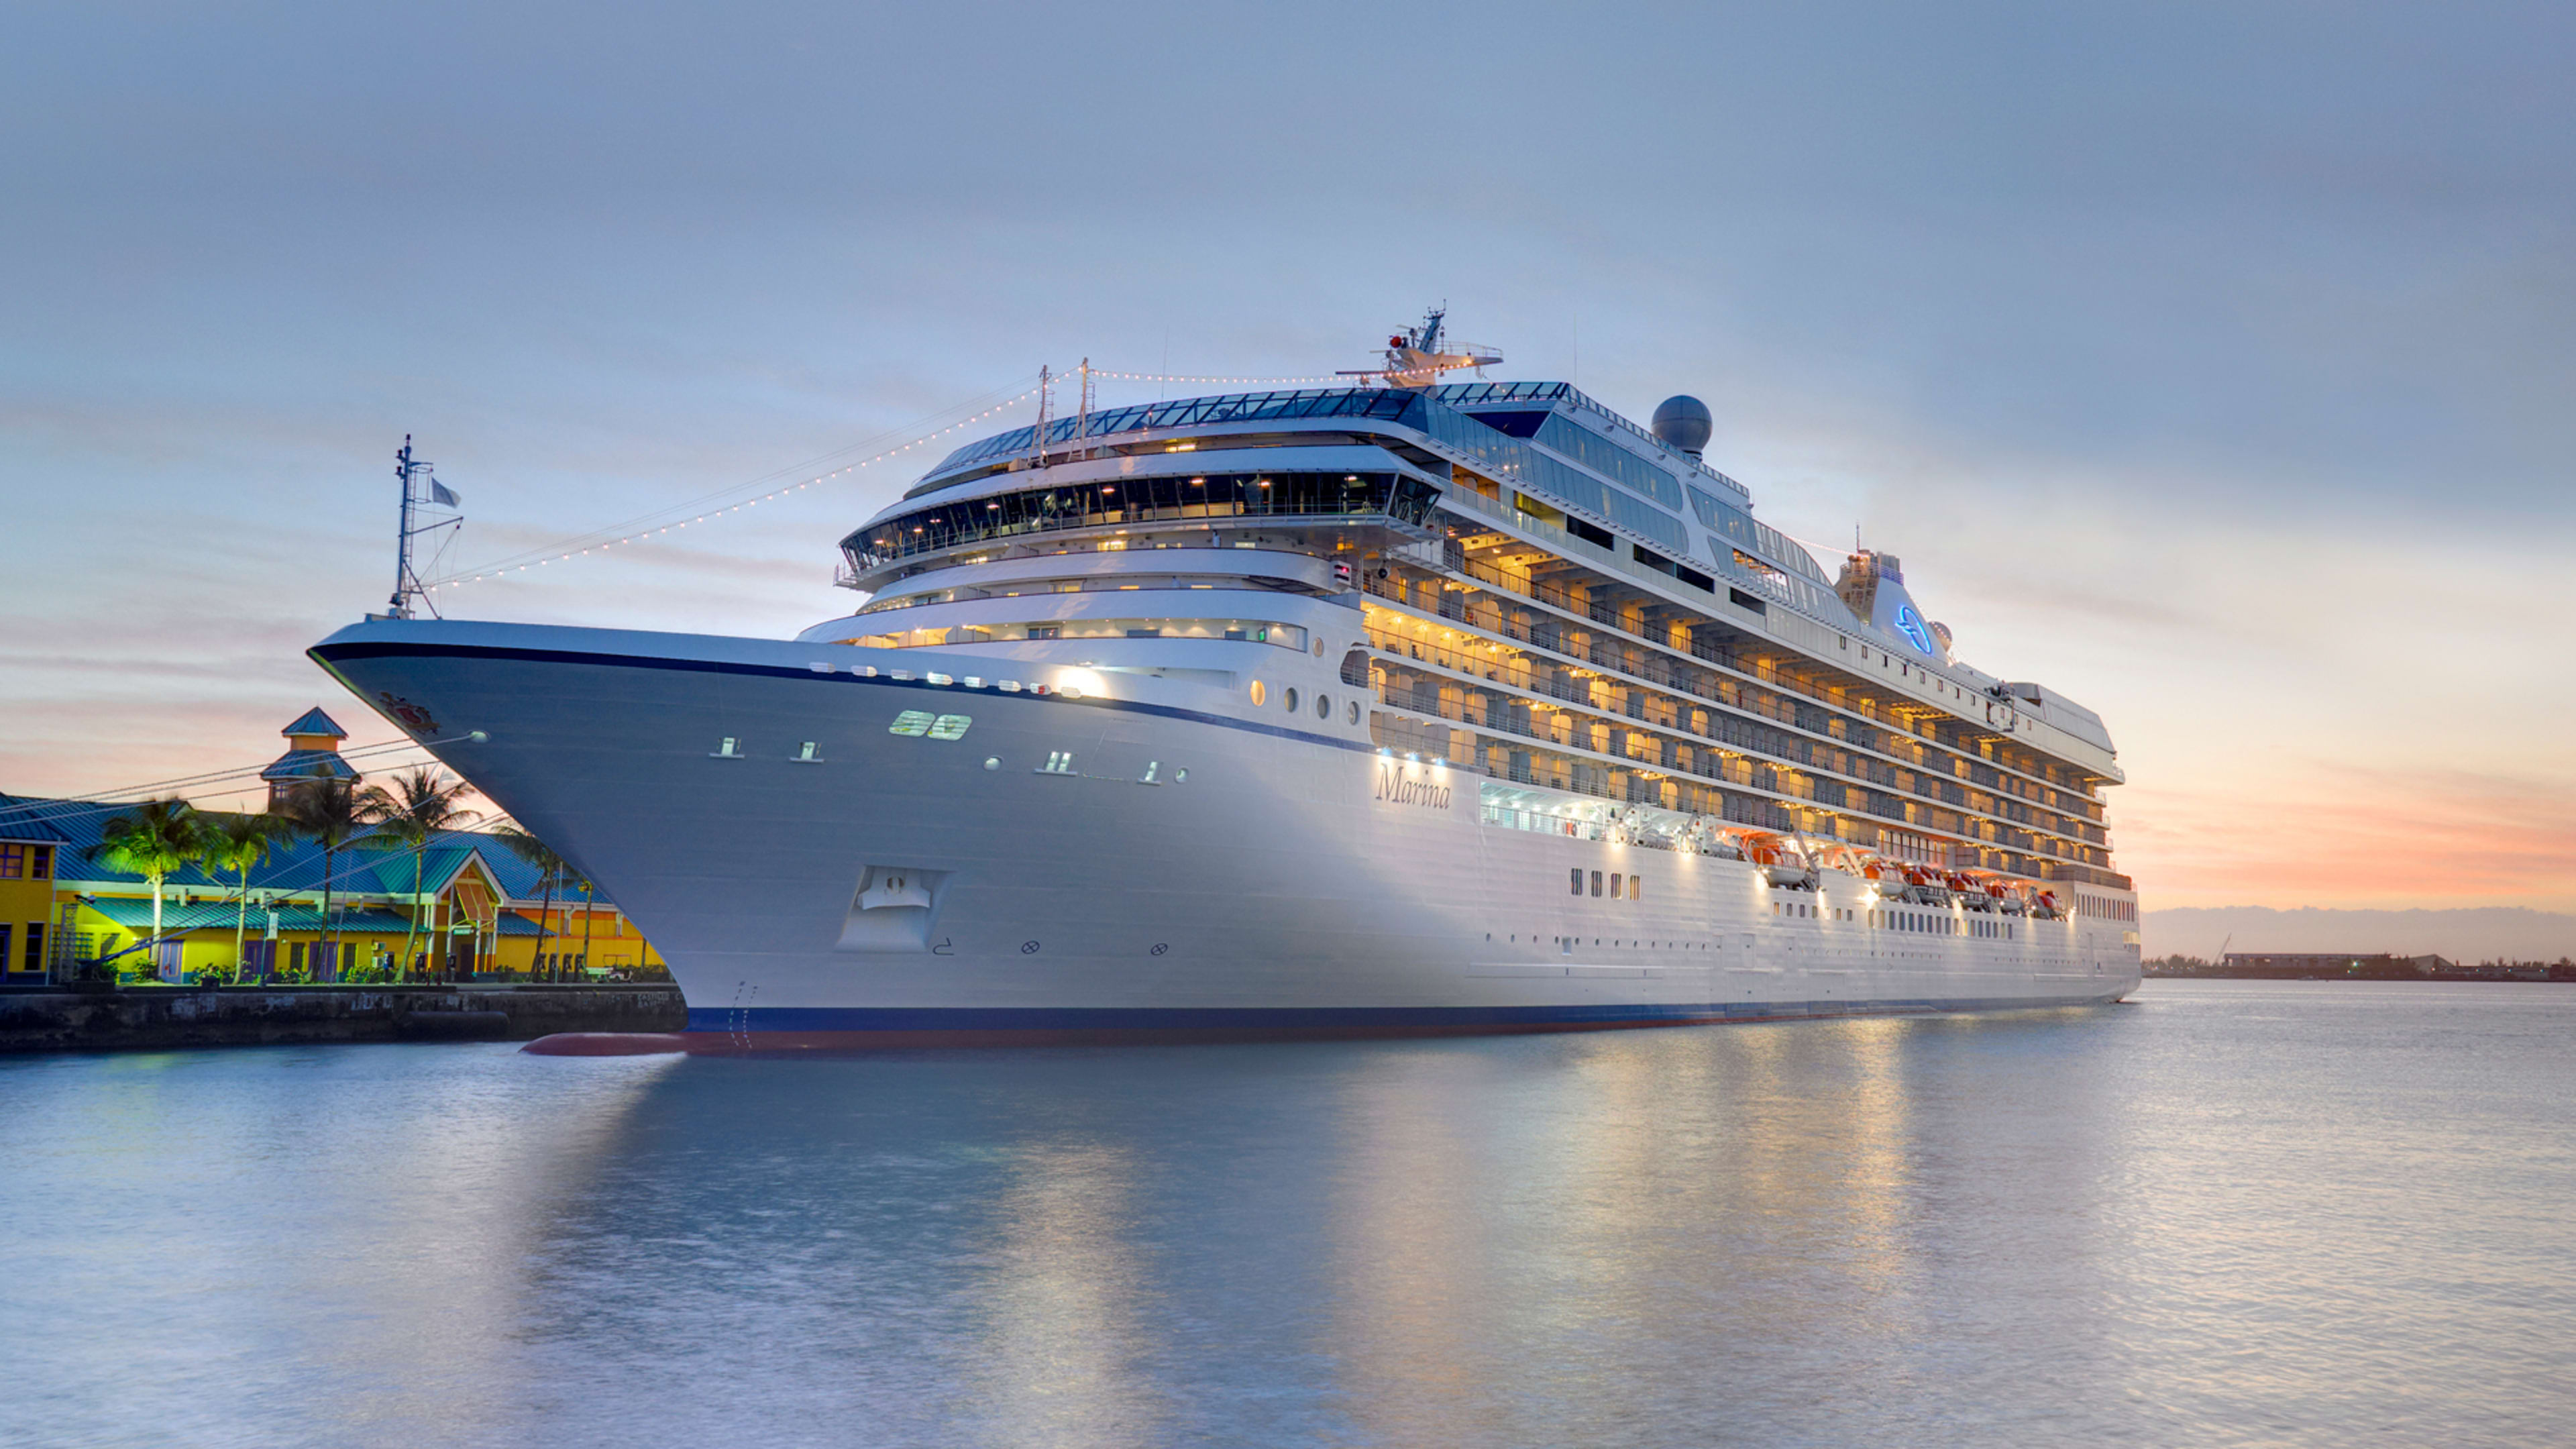 This cruise line just became the first to eliminate plastic water bottles